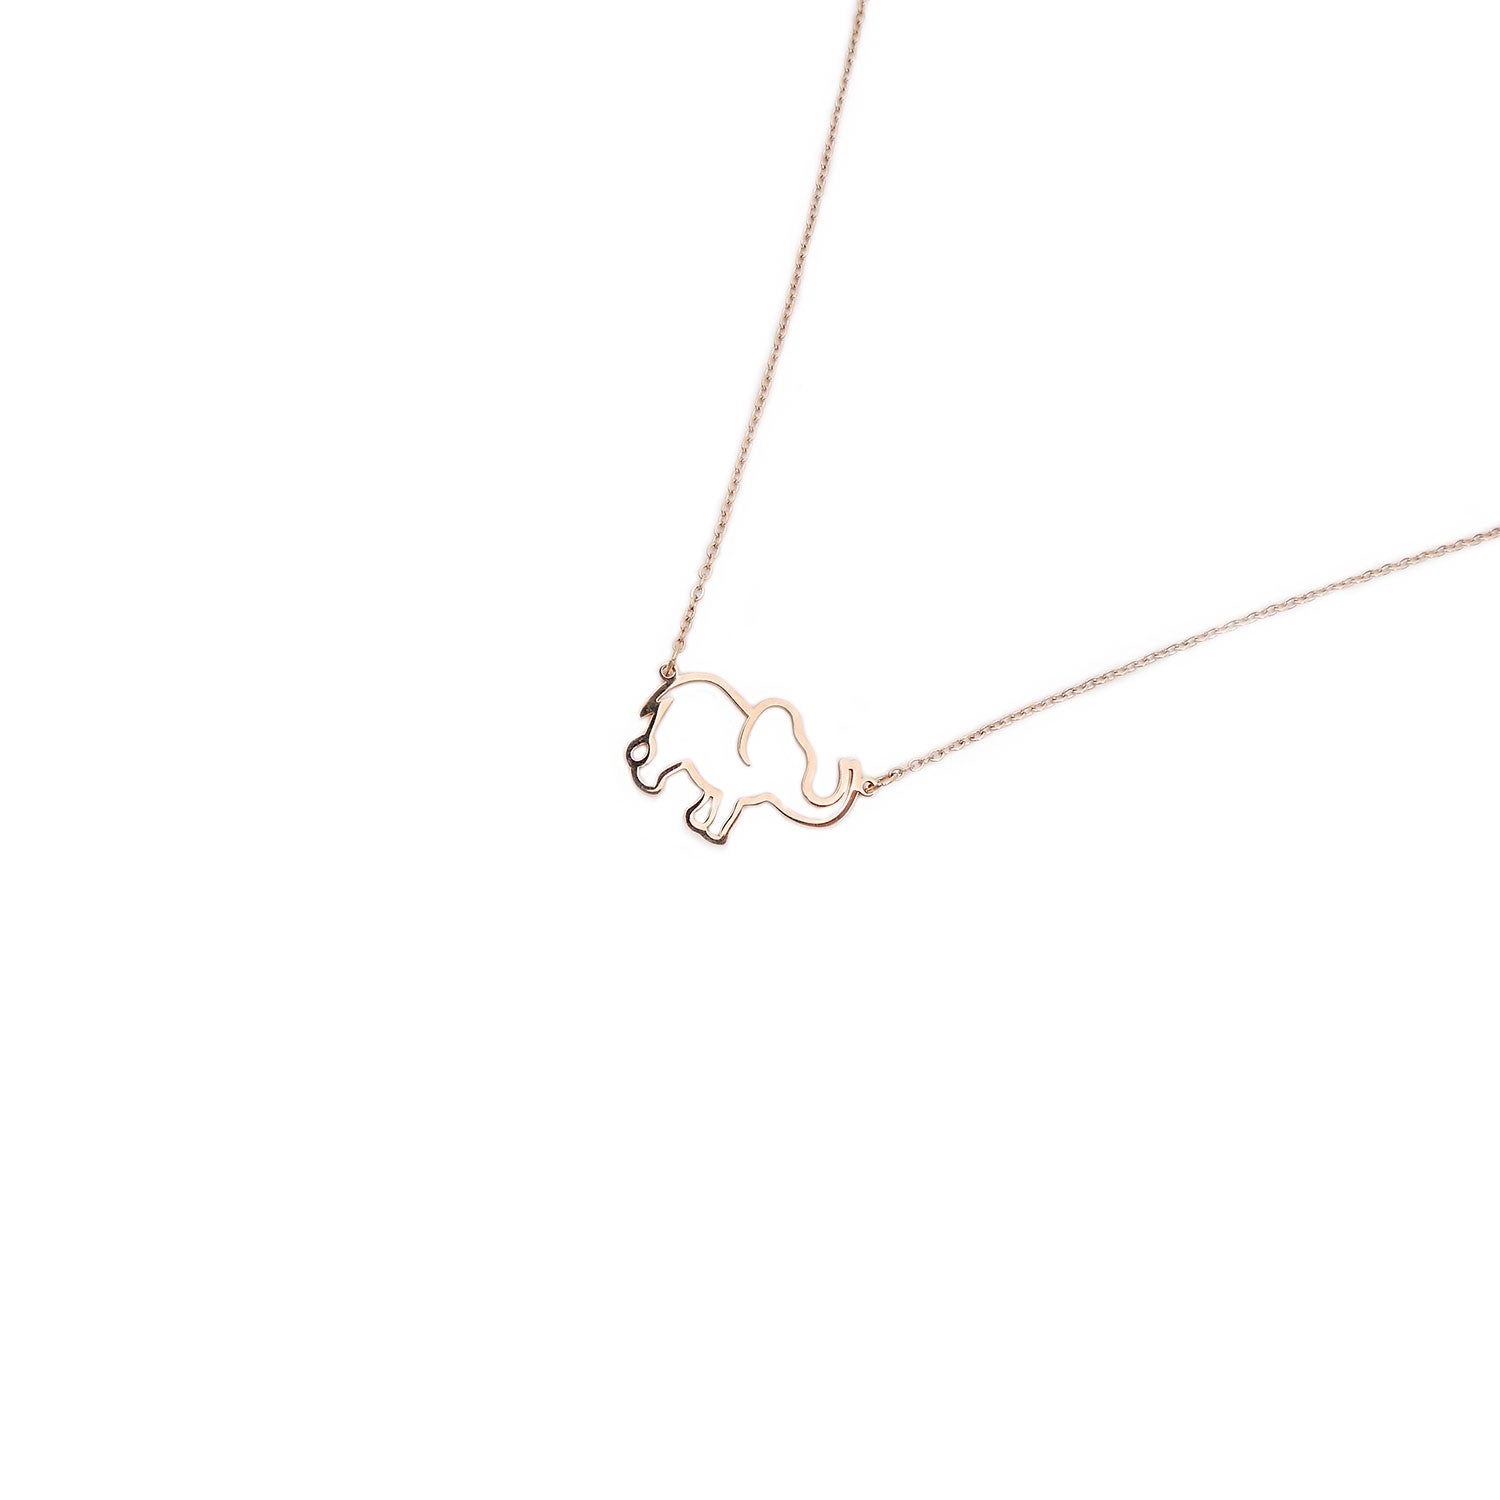 Majestic Elephant Necklace in Rose Gold